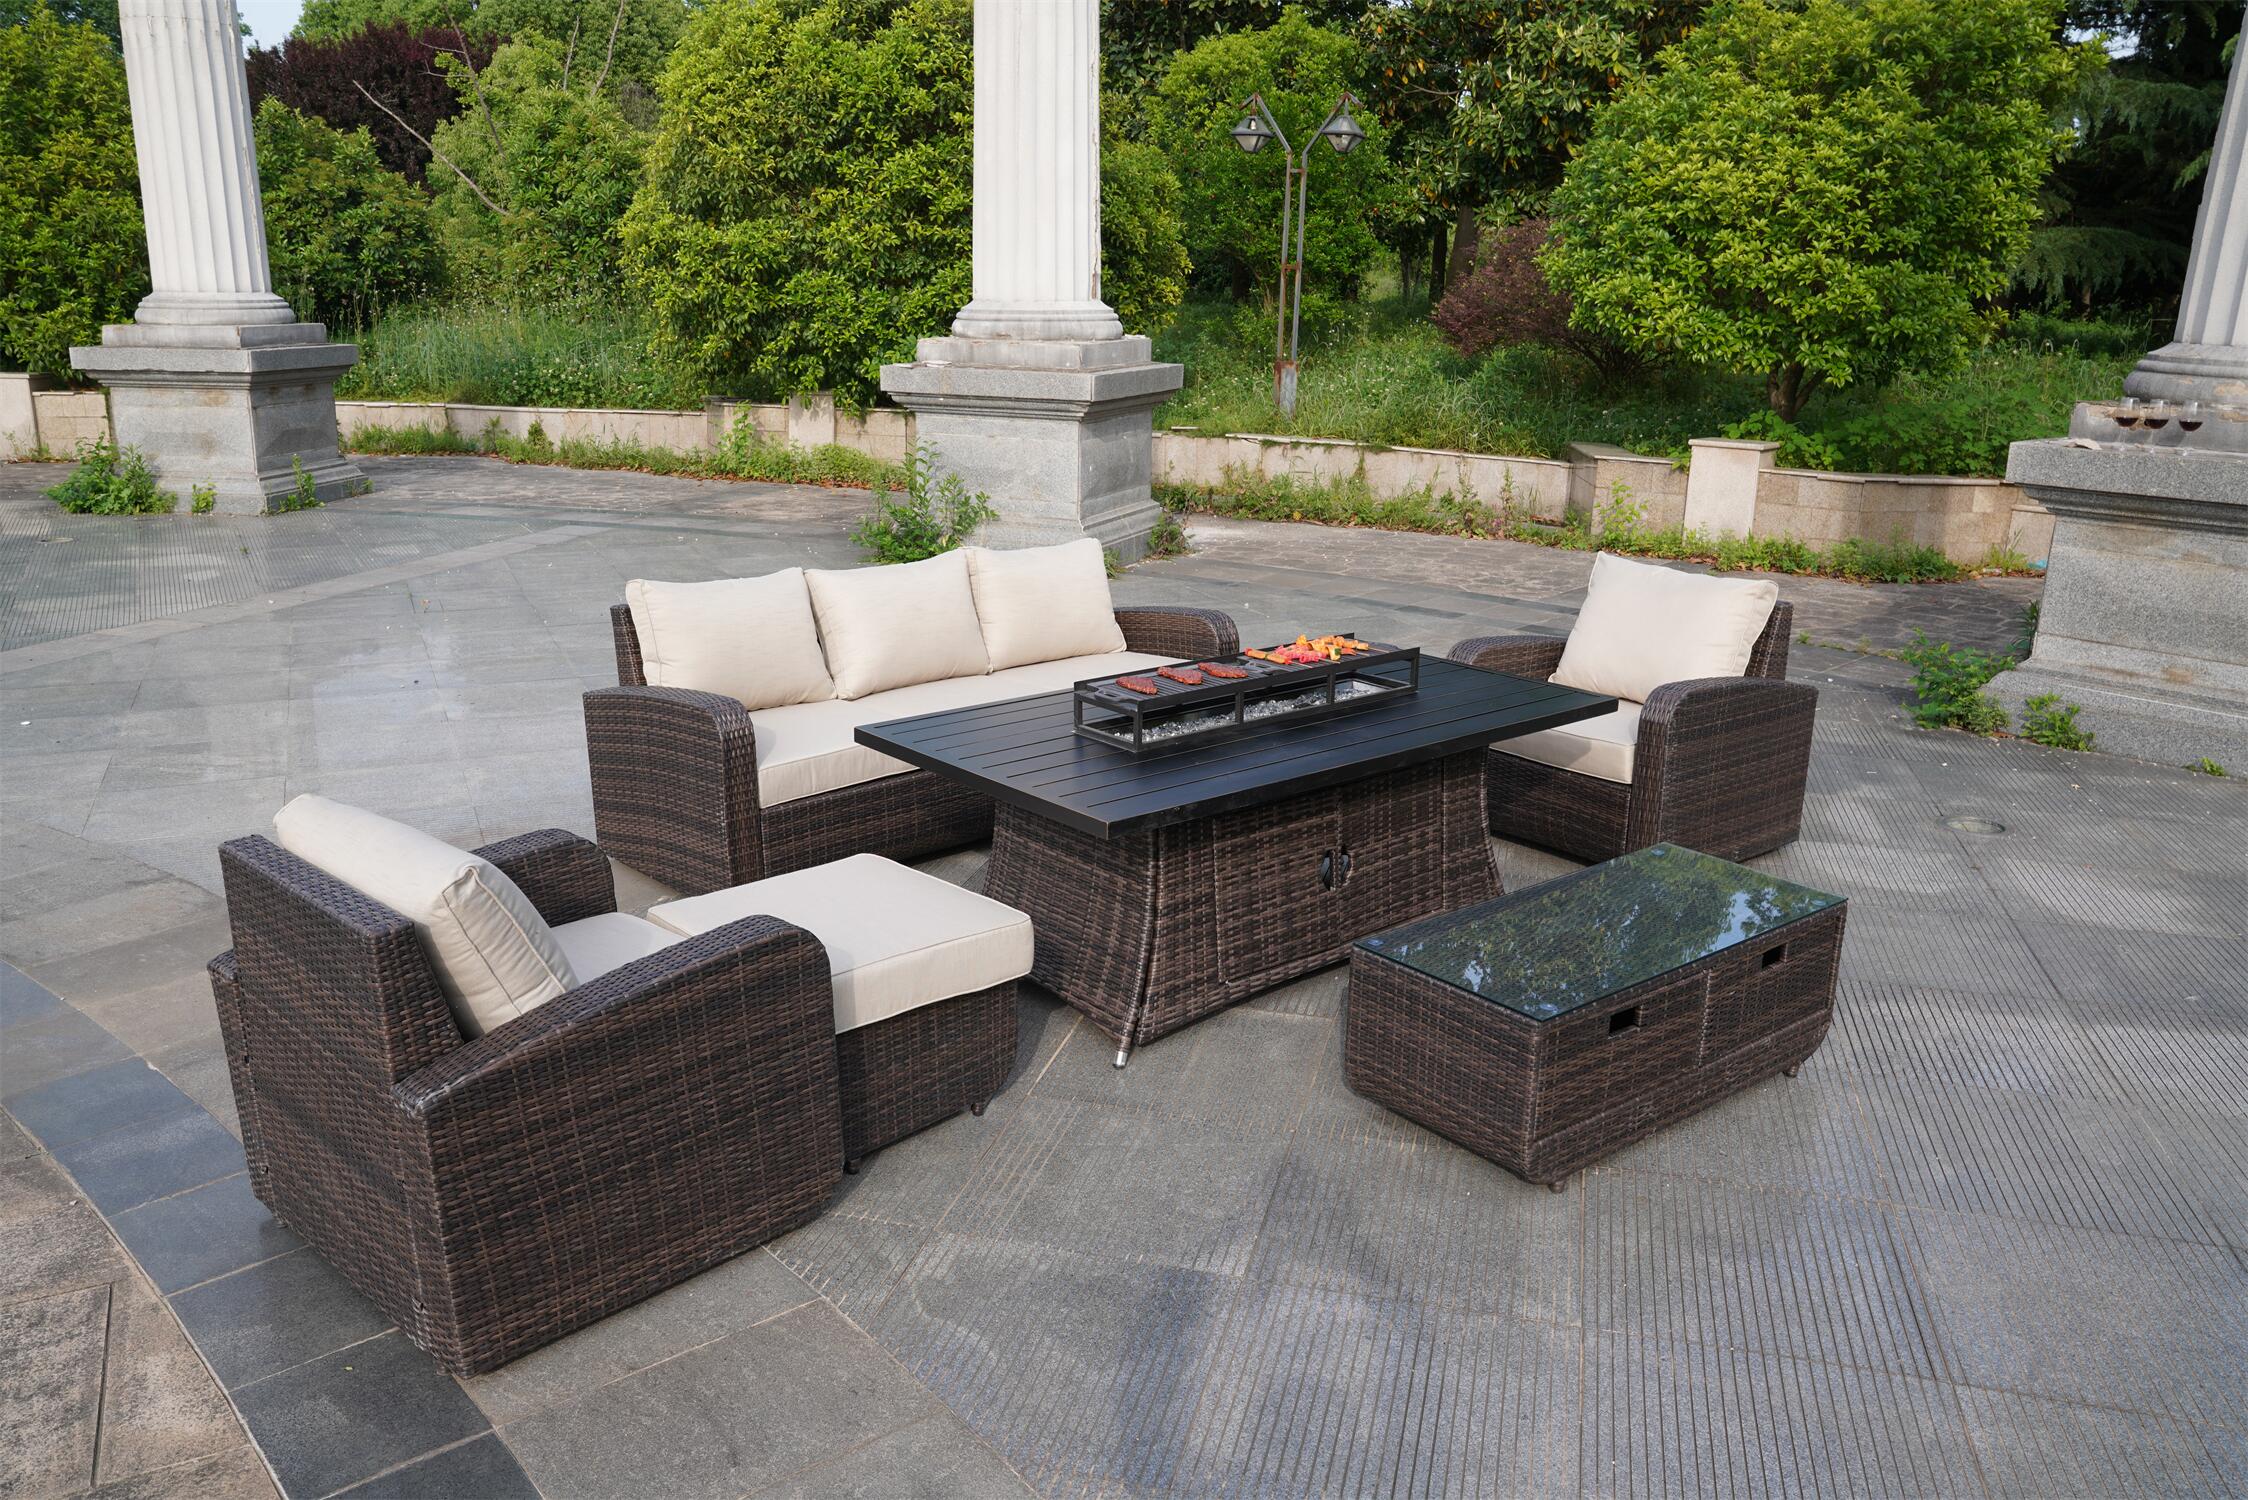 7-Piece Patio Wicker Sofa Set with Firepit Table with BBQ Plate